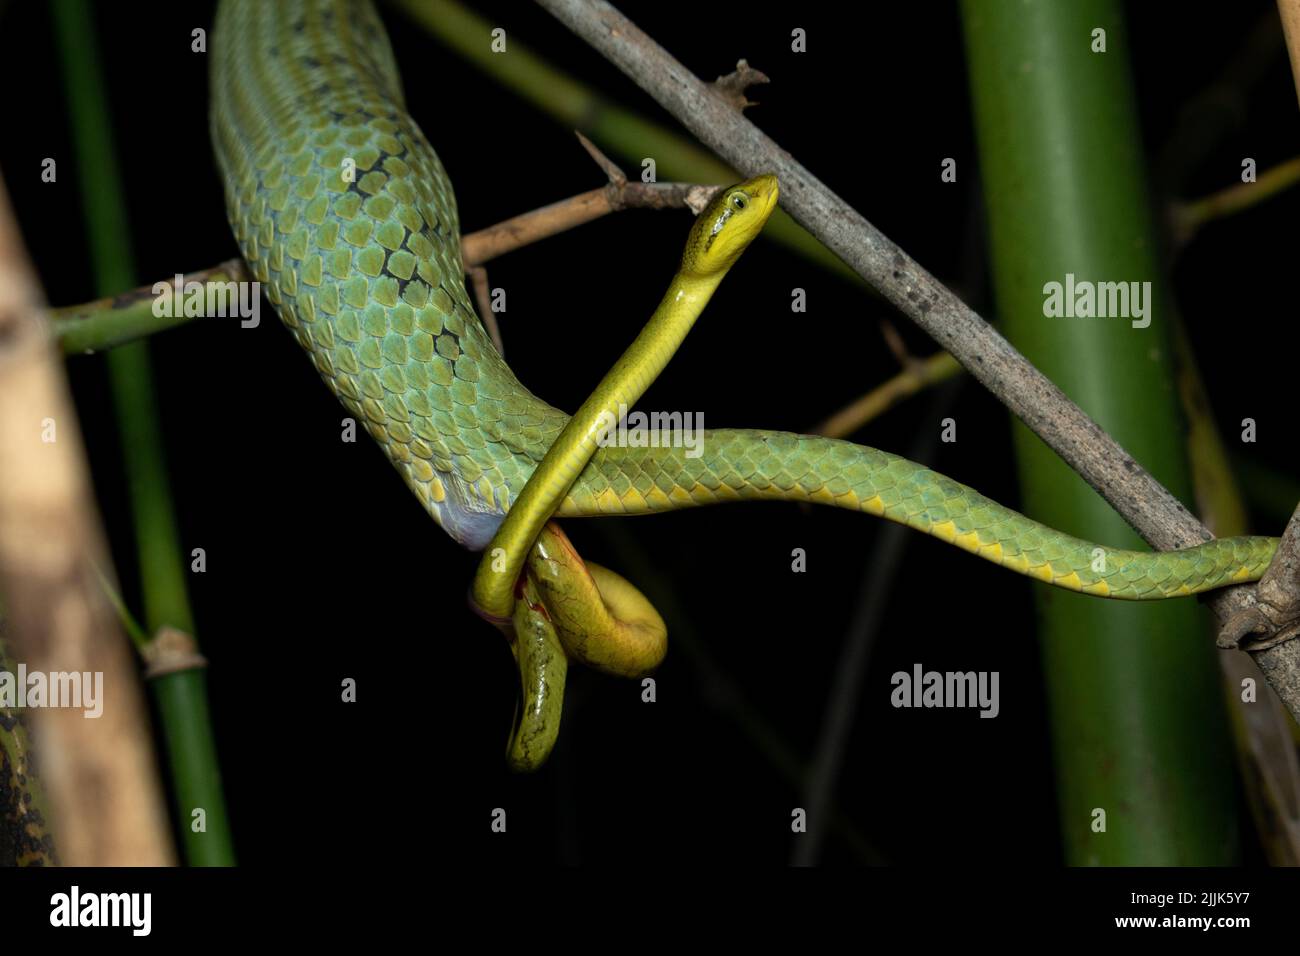 This is a baby bamboo pit viper Valsad, India: THESE INCREDIBLE images capture a rare site of a snake giving birth, multiple tails extending from its Stock Photo